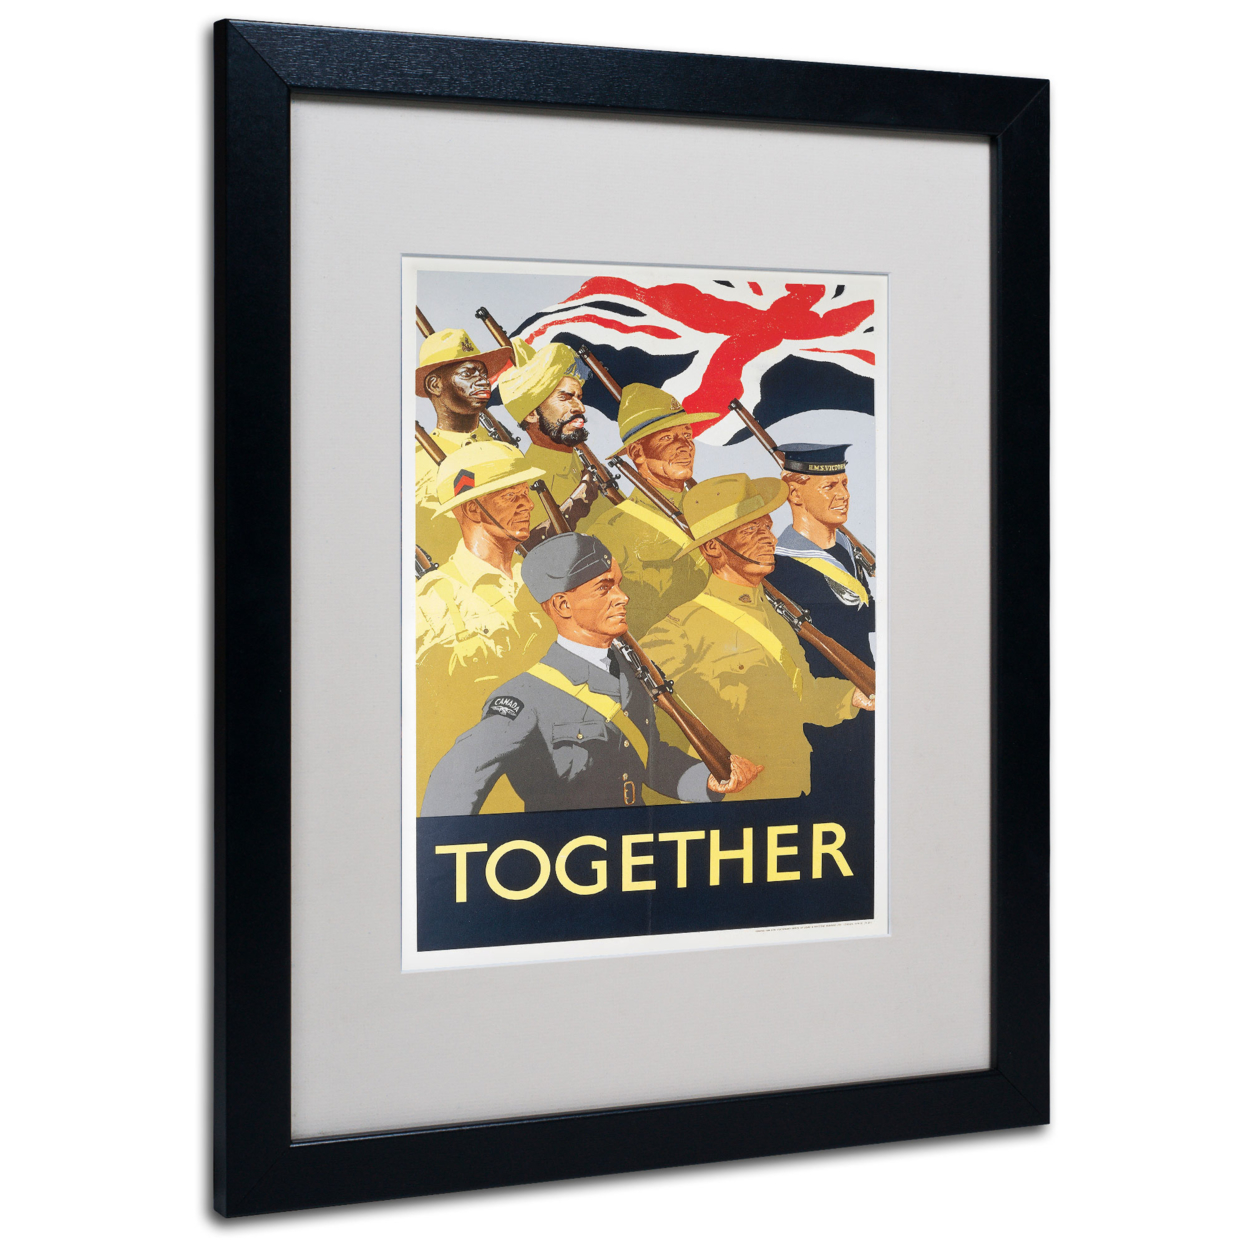 Together Propaganda Poster' Black Wooden Framed Art 18 X 22 Inches